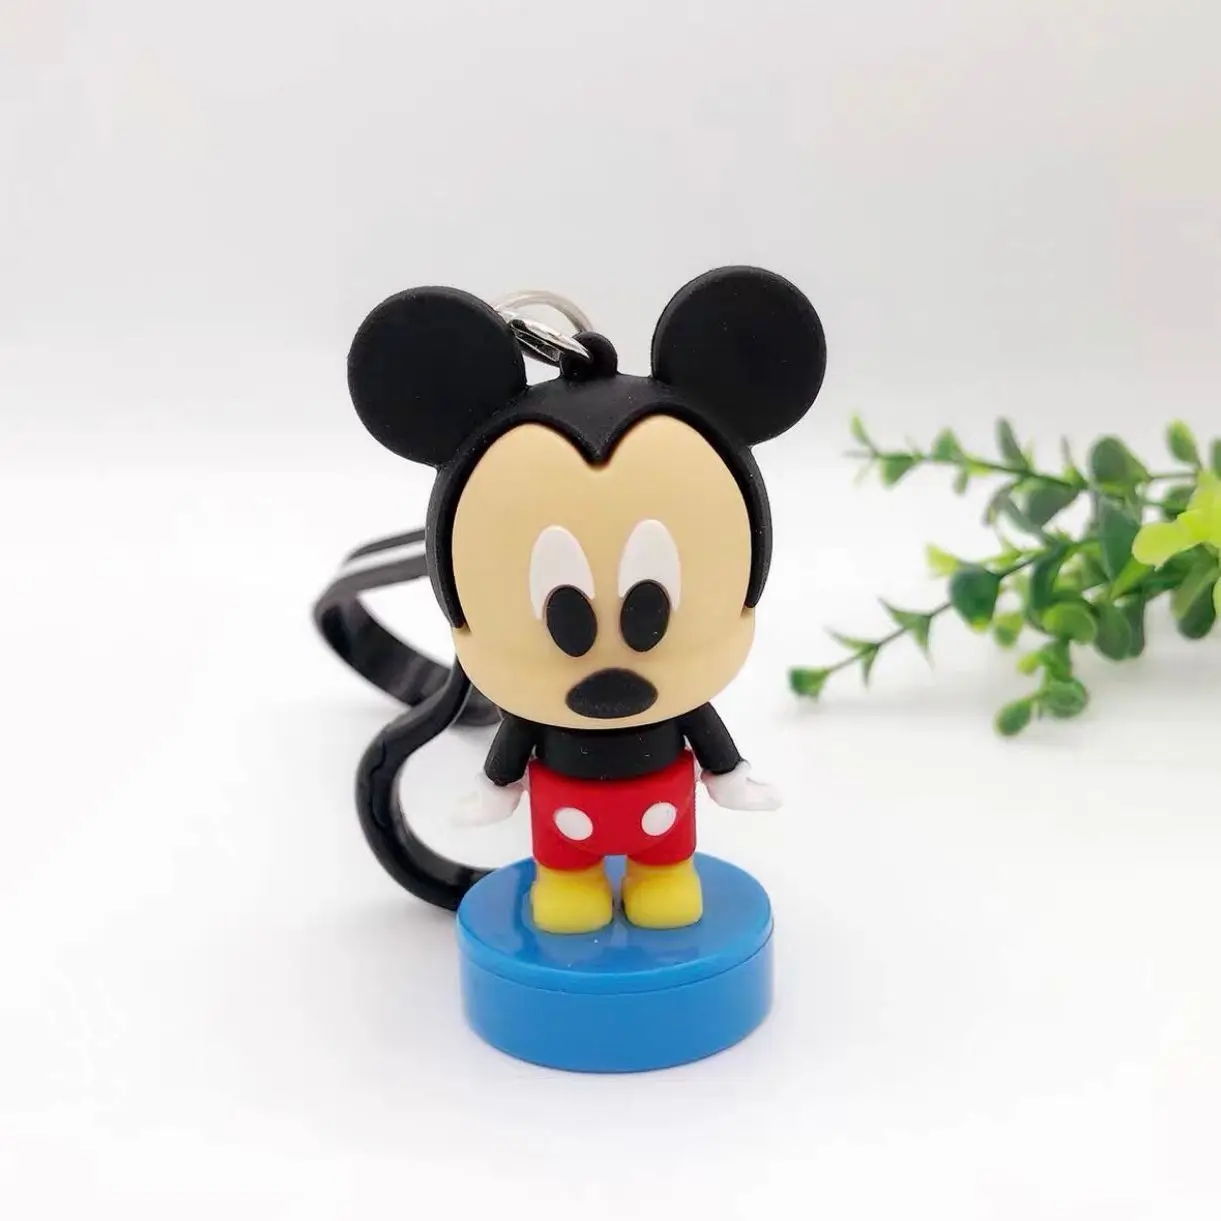 

Disney Custom Stamp Mickey Minnie Mouse Children's Name Clothing Stamp Cartoon Seal Stamps for Children's Clothing Kids DIY